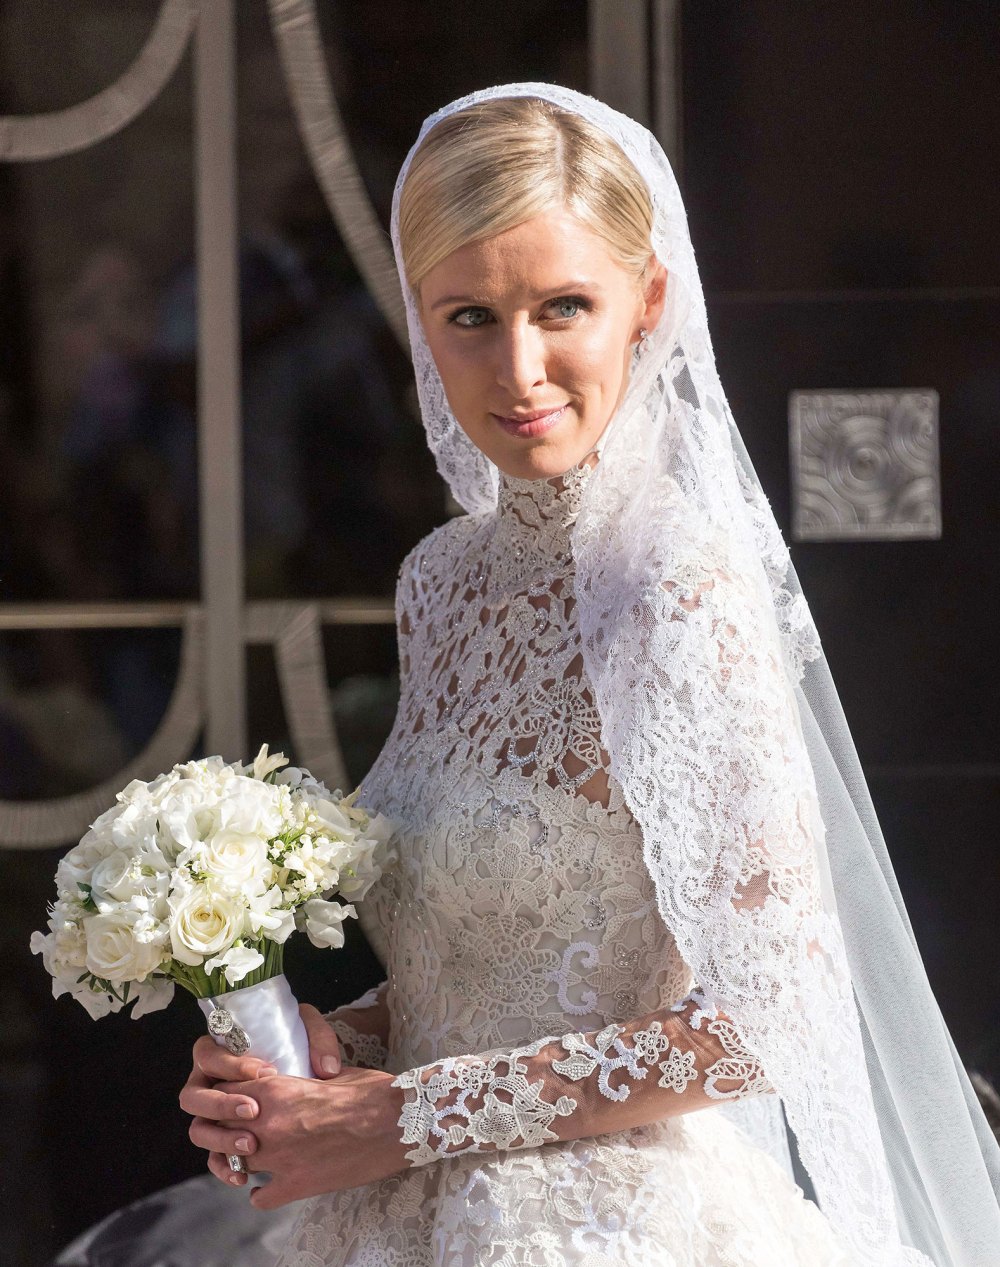 Nicky Hilton Marries James Rothschild: See Photos of Her Wedding Dress, Paris’ Bridesmaid Dress, and More!